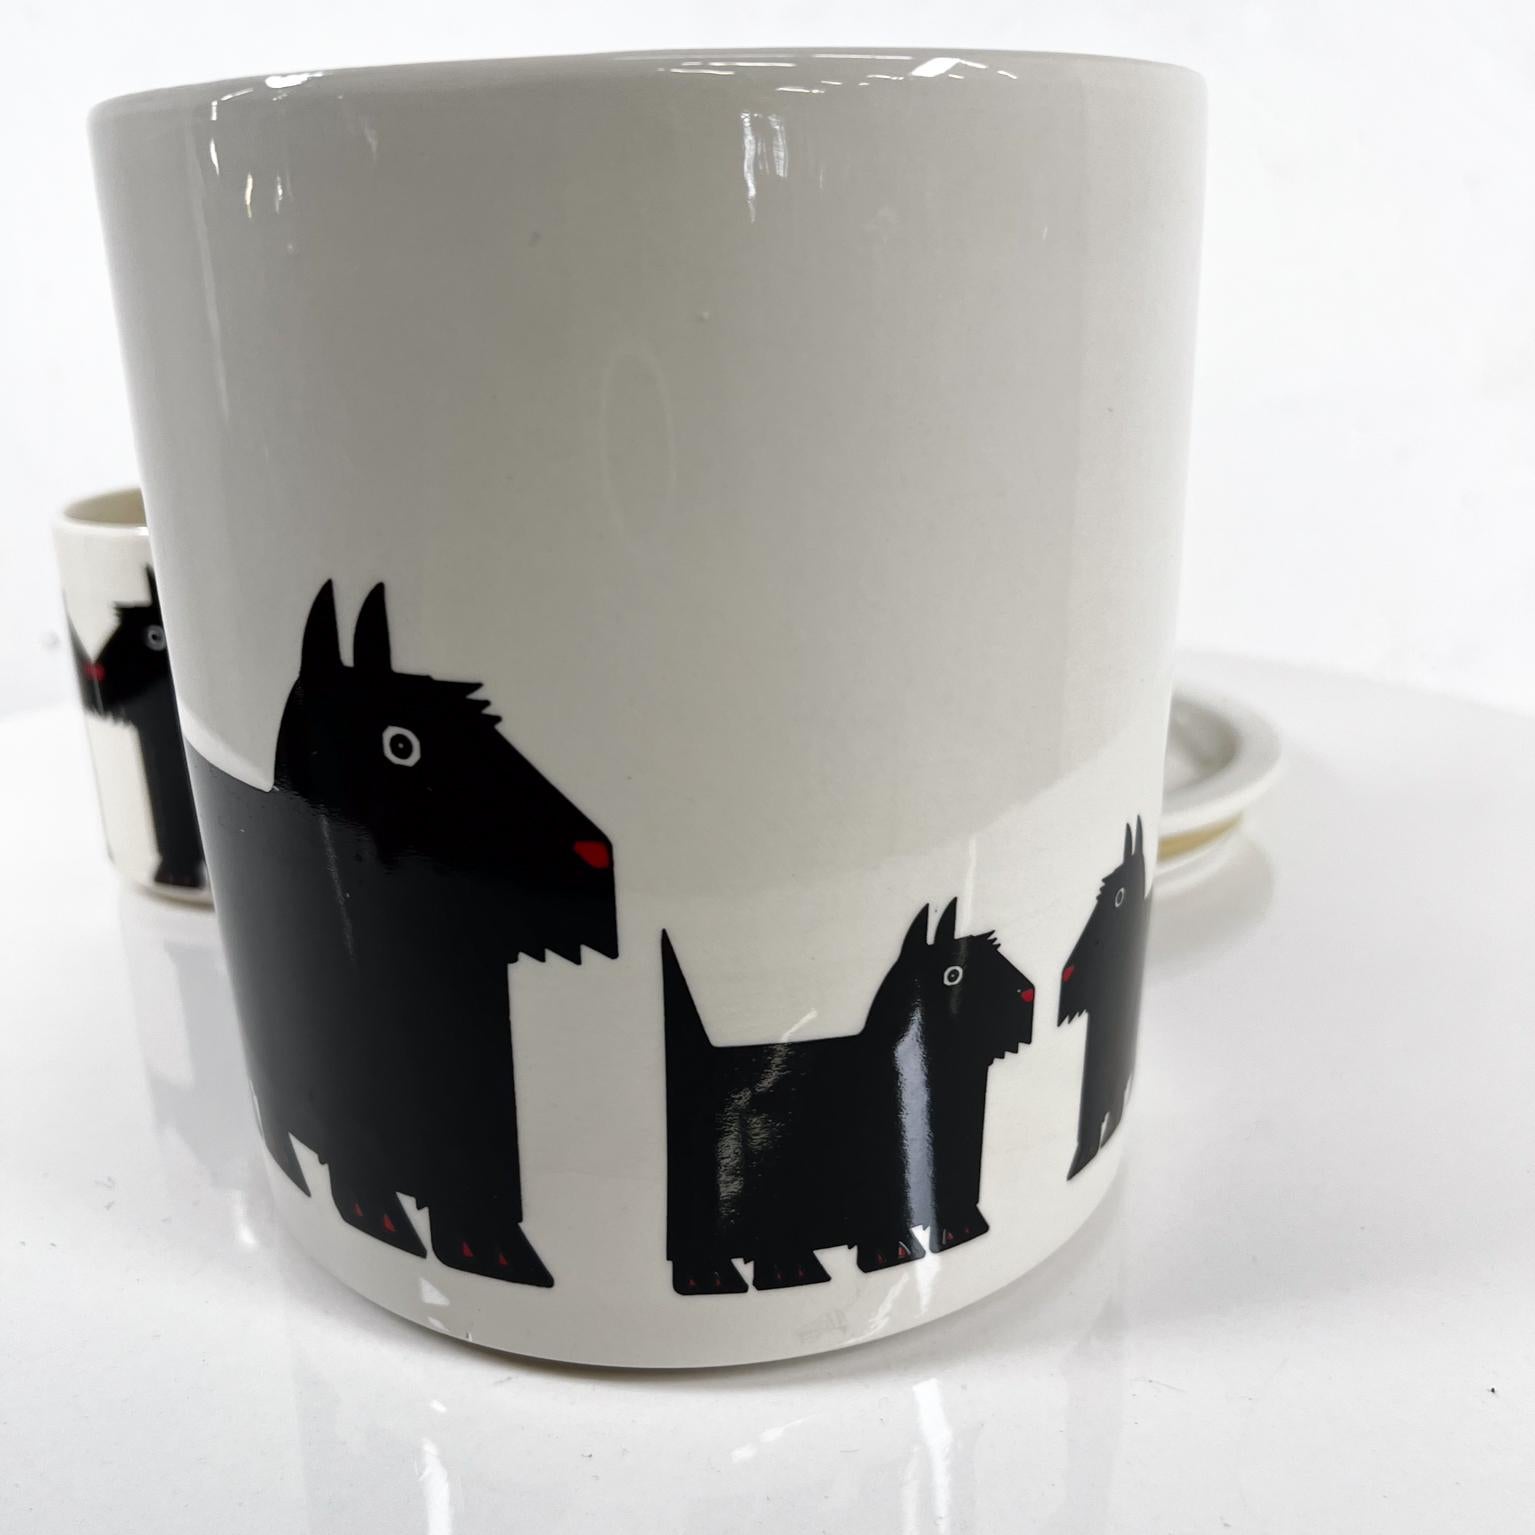 1984 Taylor & NG Minimals Scottish Terrier Dog Cookie Jar and Mug In Good Condition For Sale In Chula Vista, CA